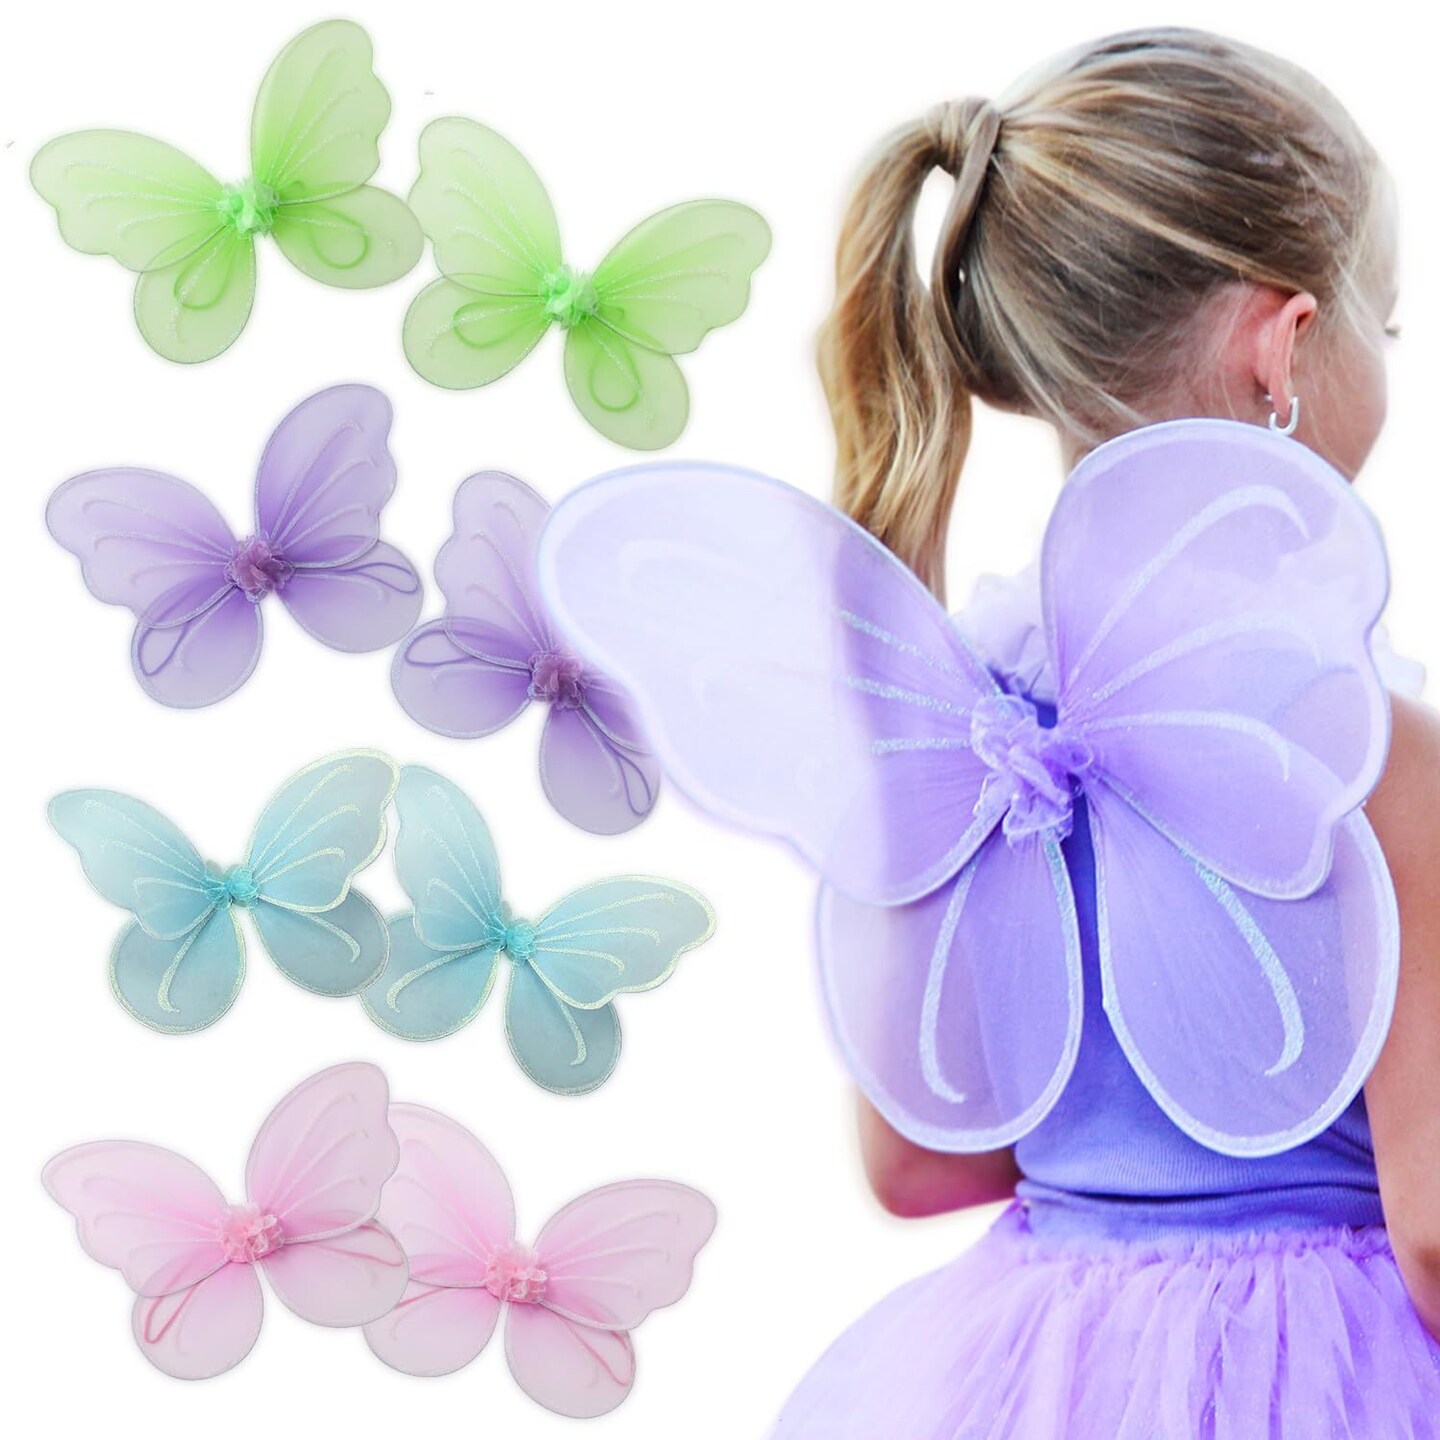 Butterfly Craze Girls&#x27; Fairy, Angel, or Butterfly Wings - Costume Accessories &#x26; Party Favors or Supplies, Make Your Little One&#x27;s Birthday Party Special, in Shades of Blue, Green, Pink, and Purple, 8pc